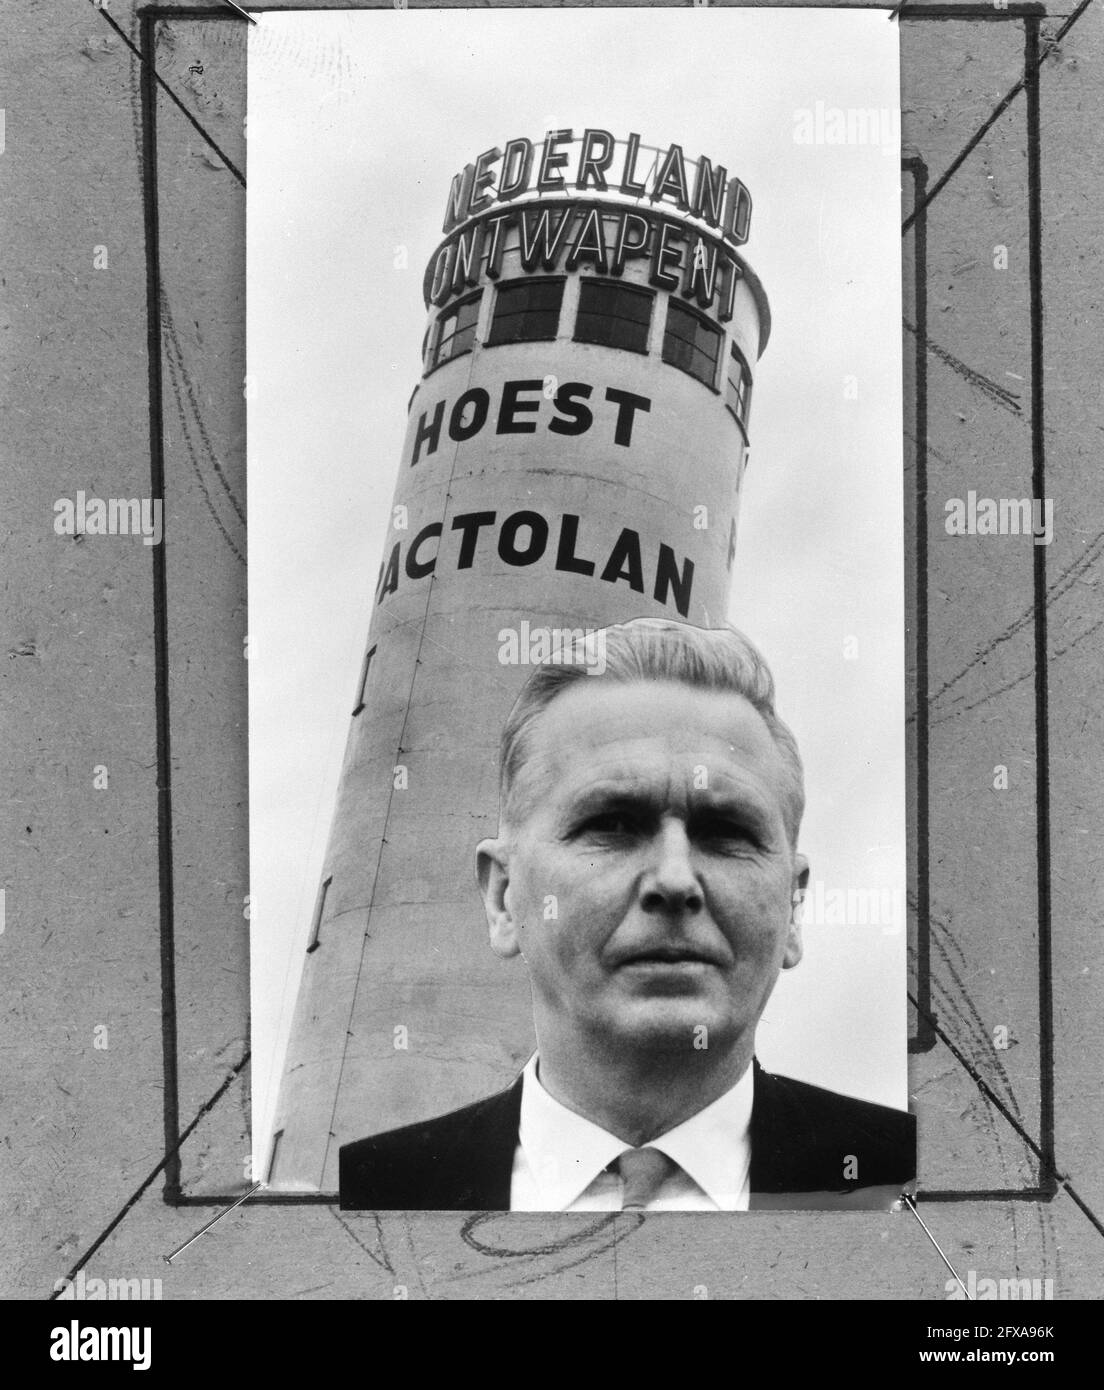 Director of The Tower at Naarden in court; Mr. Landman in front of his tower, November 25, 1965, directors, judges, towers, The Netherlands, 20th century press agency photo, news to remember, documentary, historic photography 1945-1990, visual stories, human history of the Twentieth Century, capturing moments in time Stock Photo